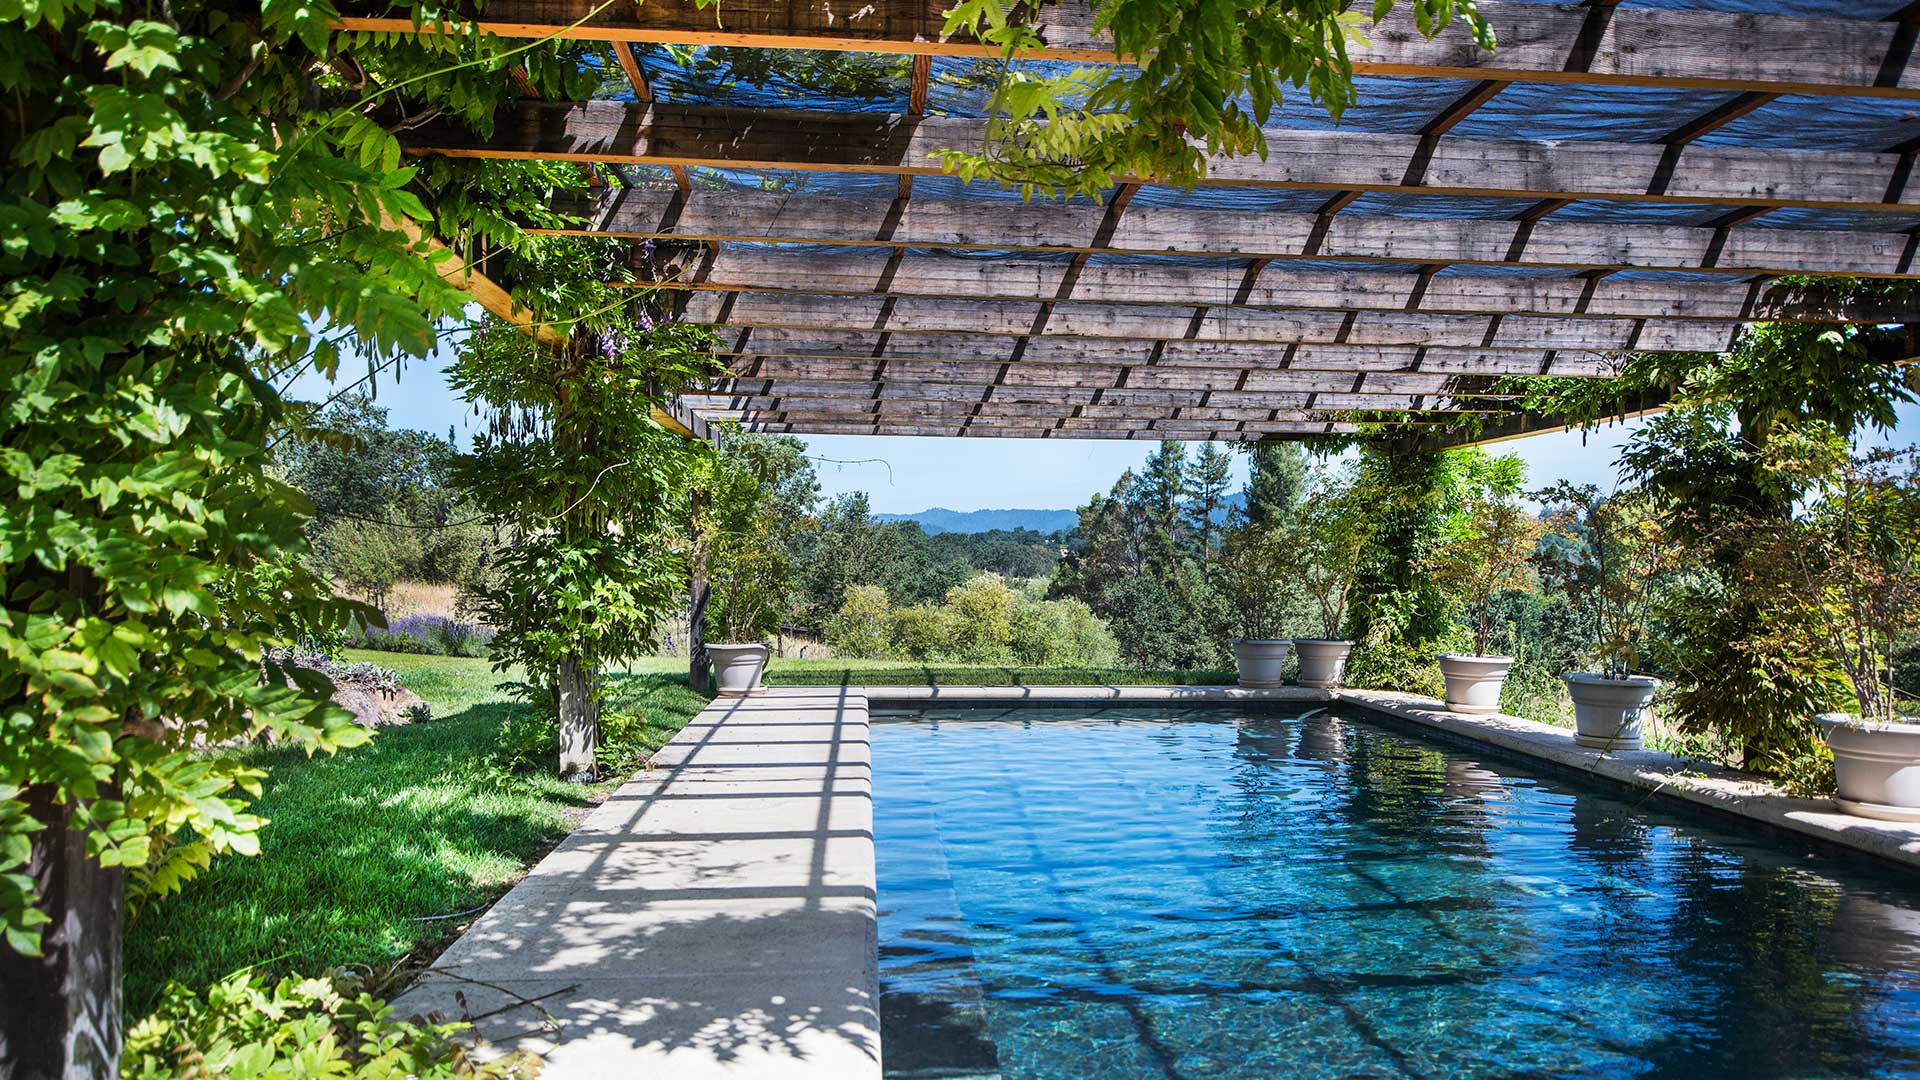 Blue, clear pool bordered by gray concrete. Pergola stretches above with plants wrapped around the columns.